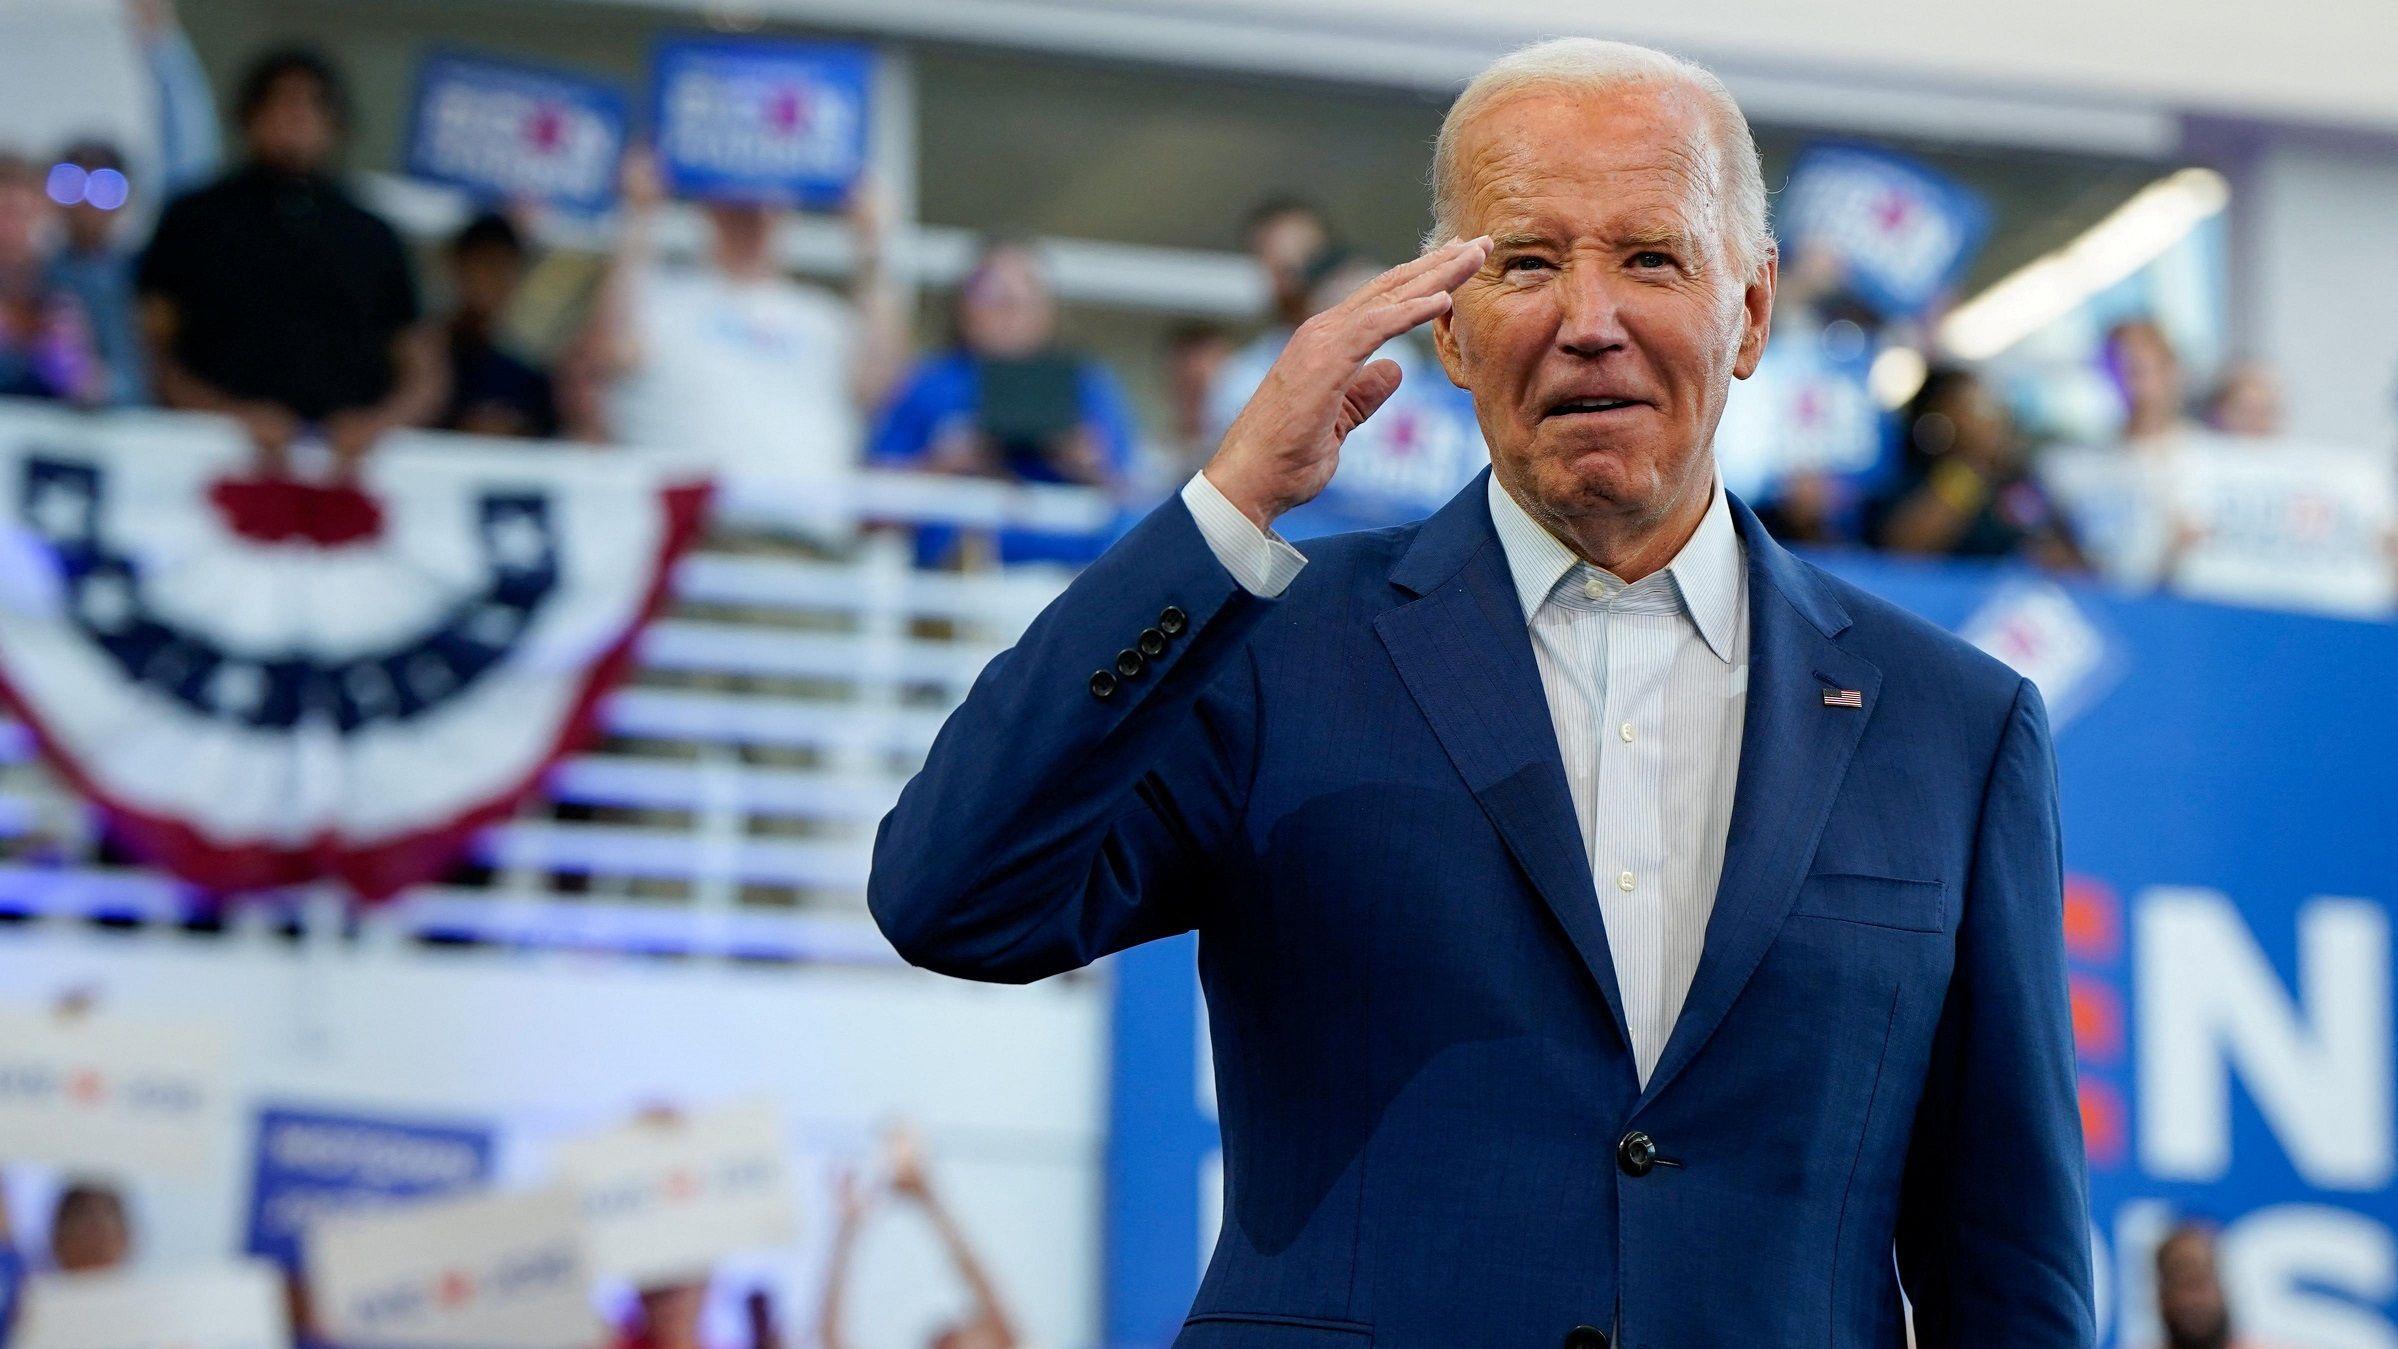 Many Democrats are sticking with Biden. Heres why